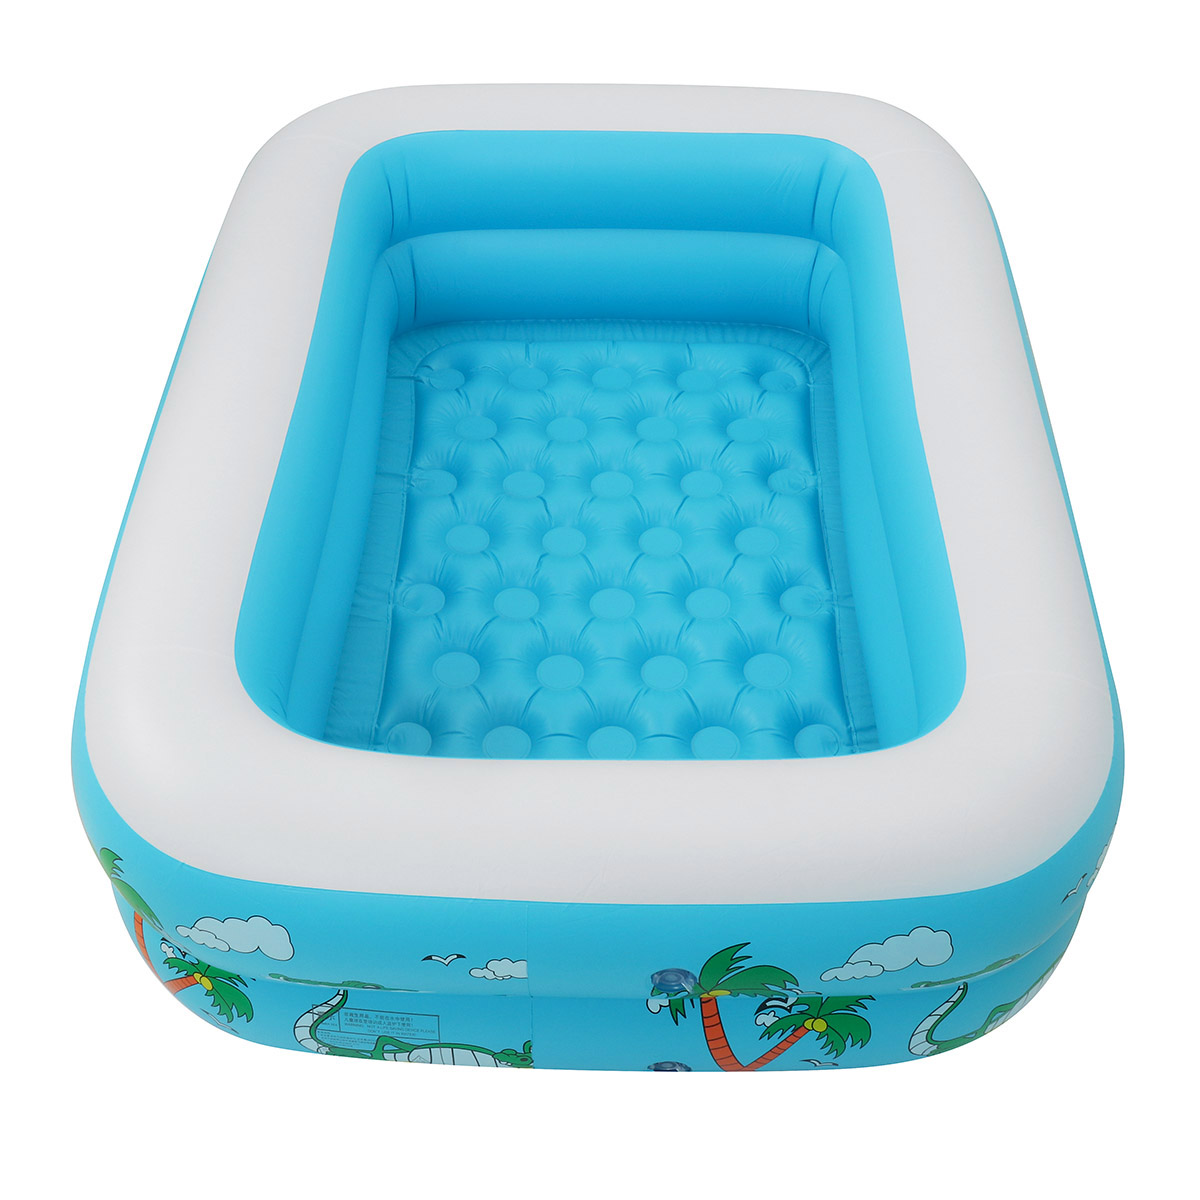 120-150CM-Family-Inflatable-Swimming-Pool-3-Ring-Thicken-Summer-Backyard-Inflate-Bathtub-for-Kids-Ad-1696845-13